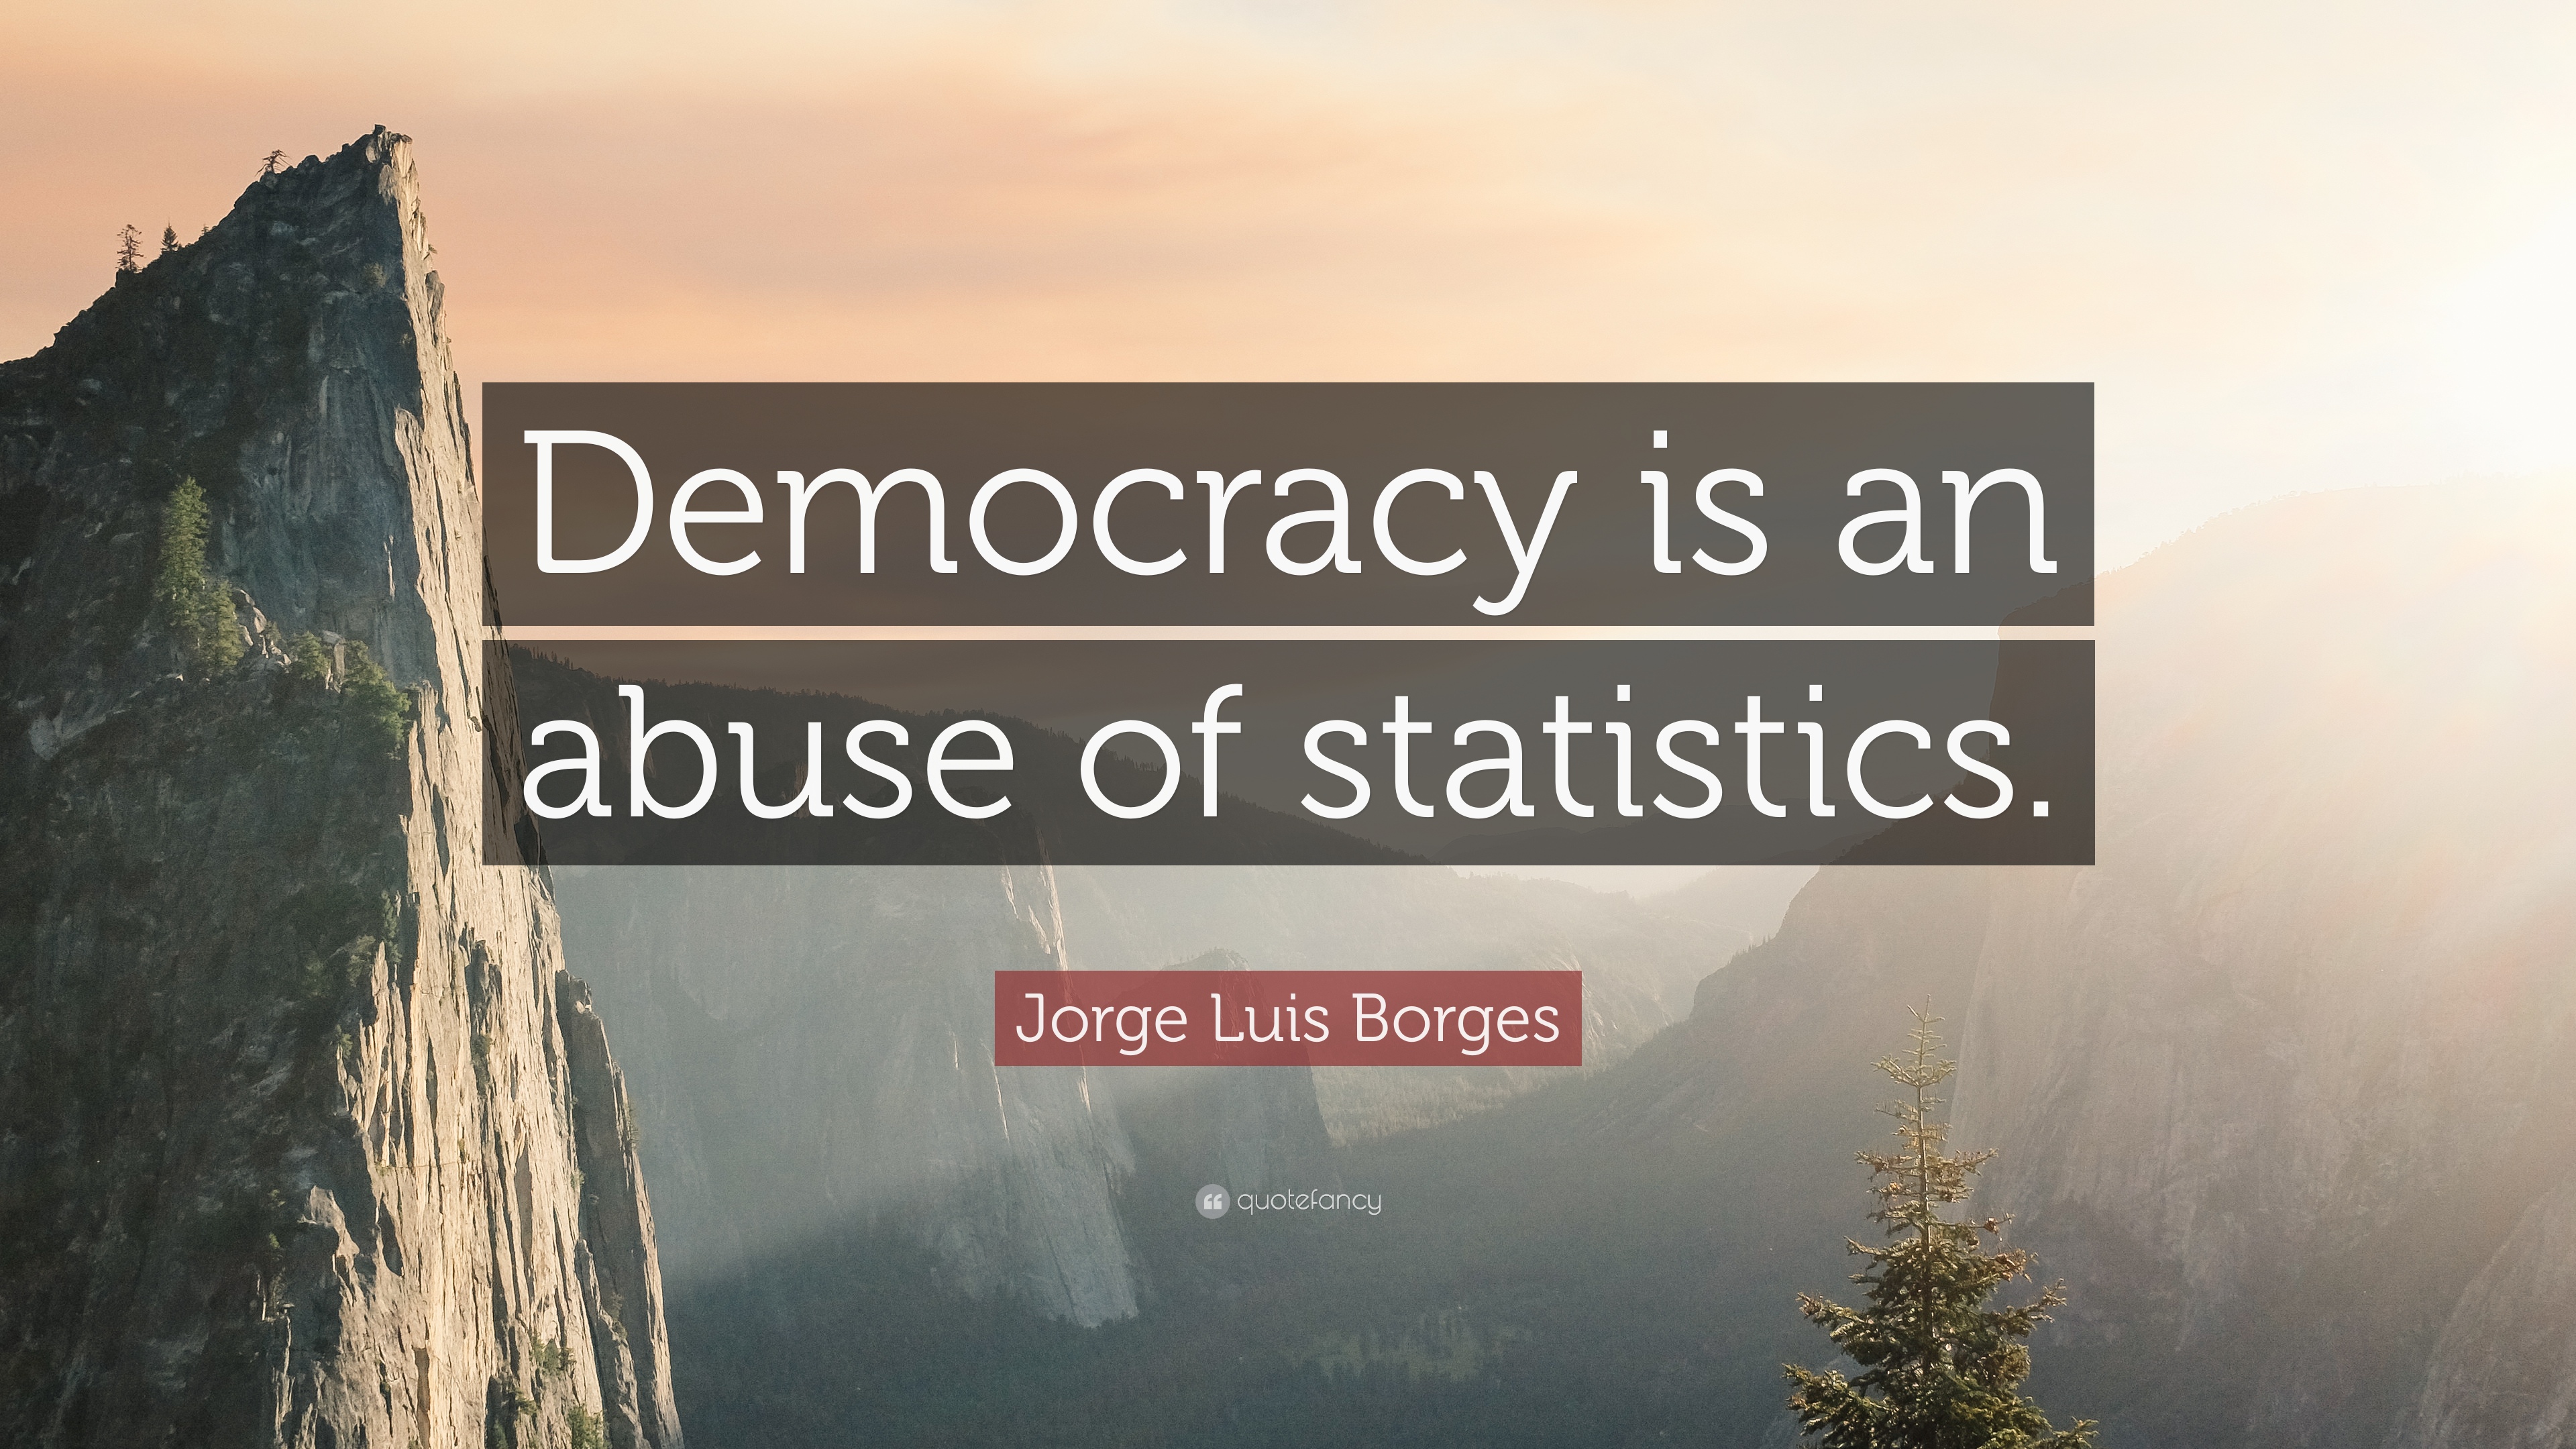 Jorge Luis Borges Quote: “Democracy is an abuse of statistics.” 12